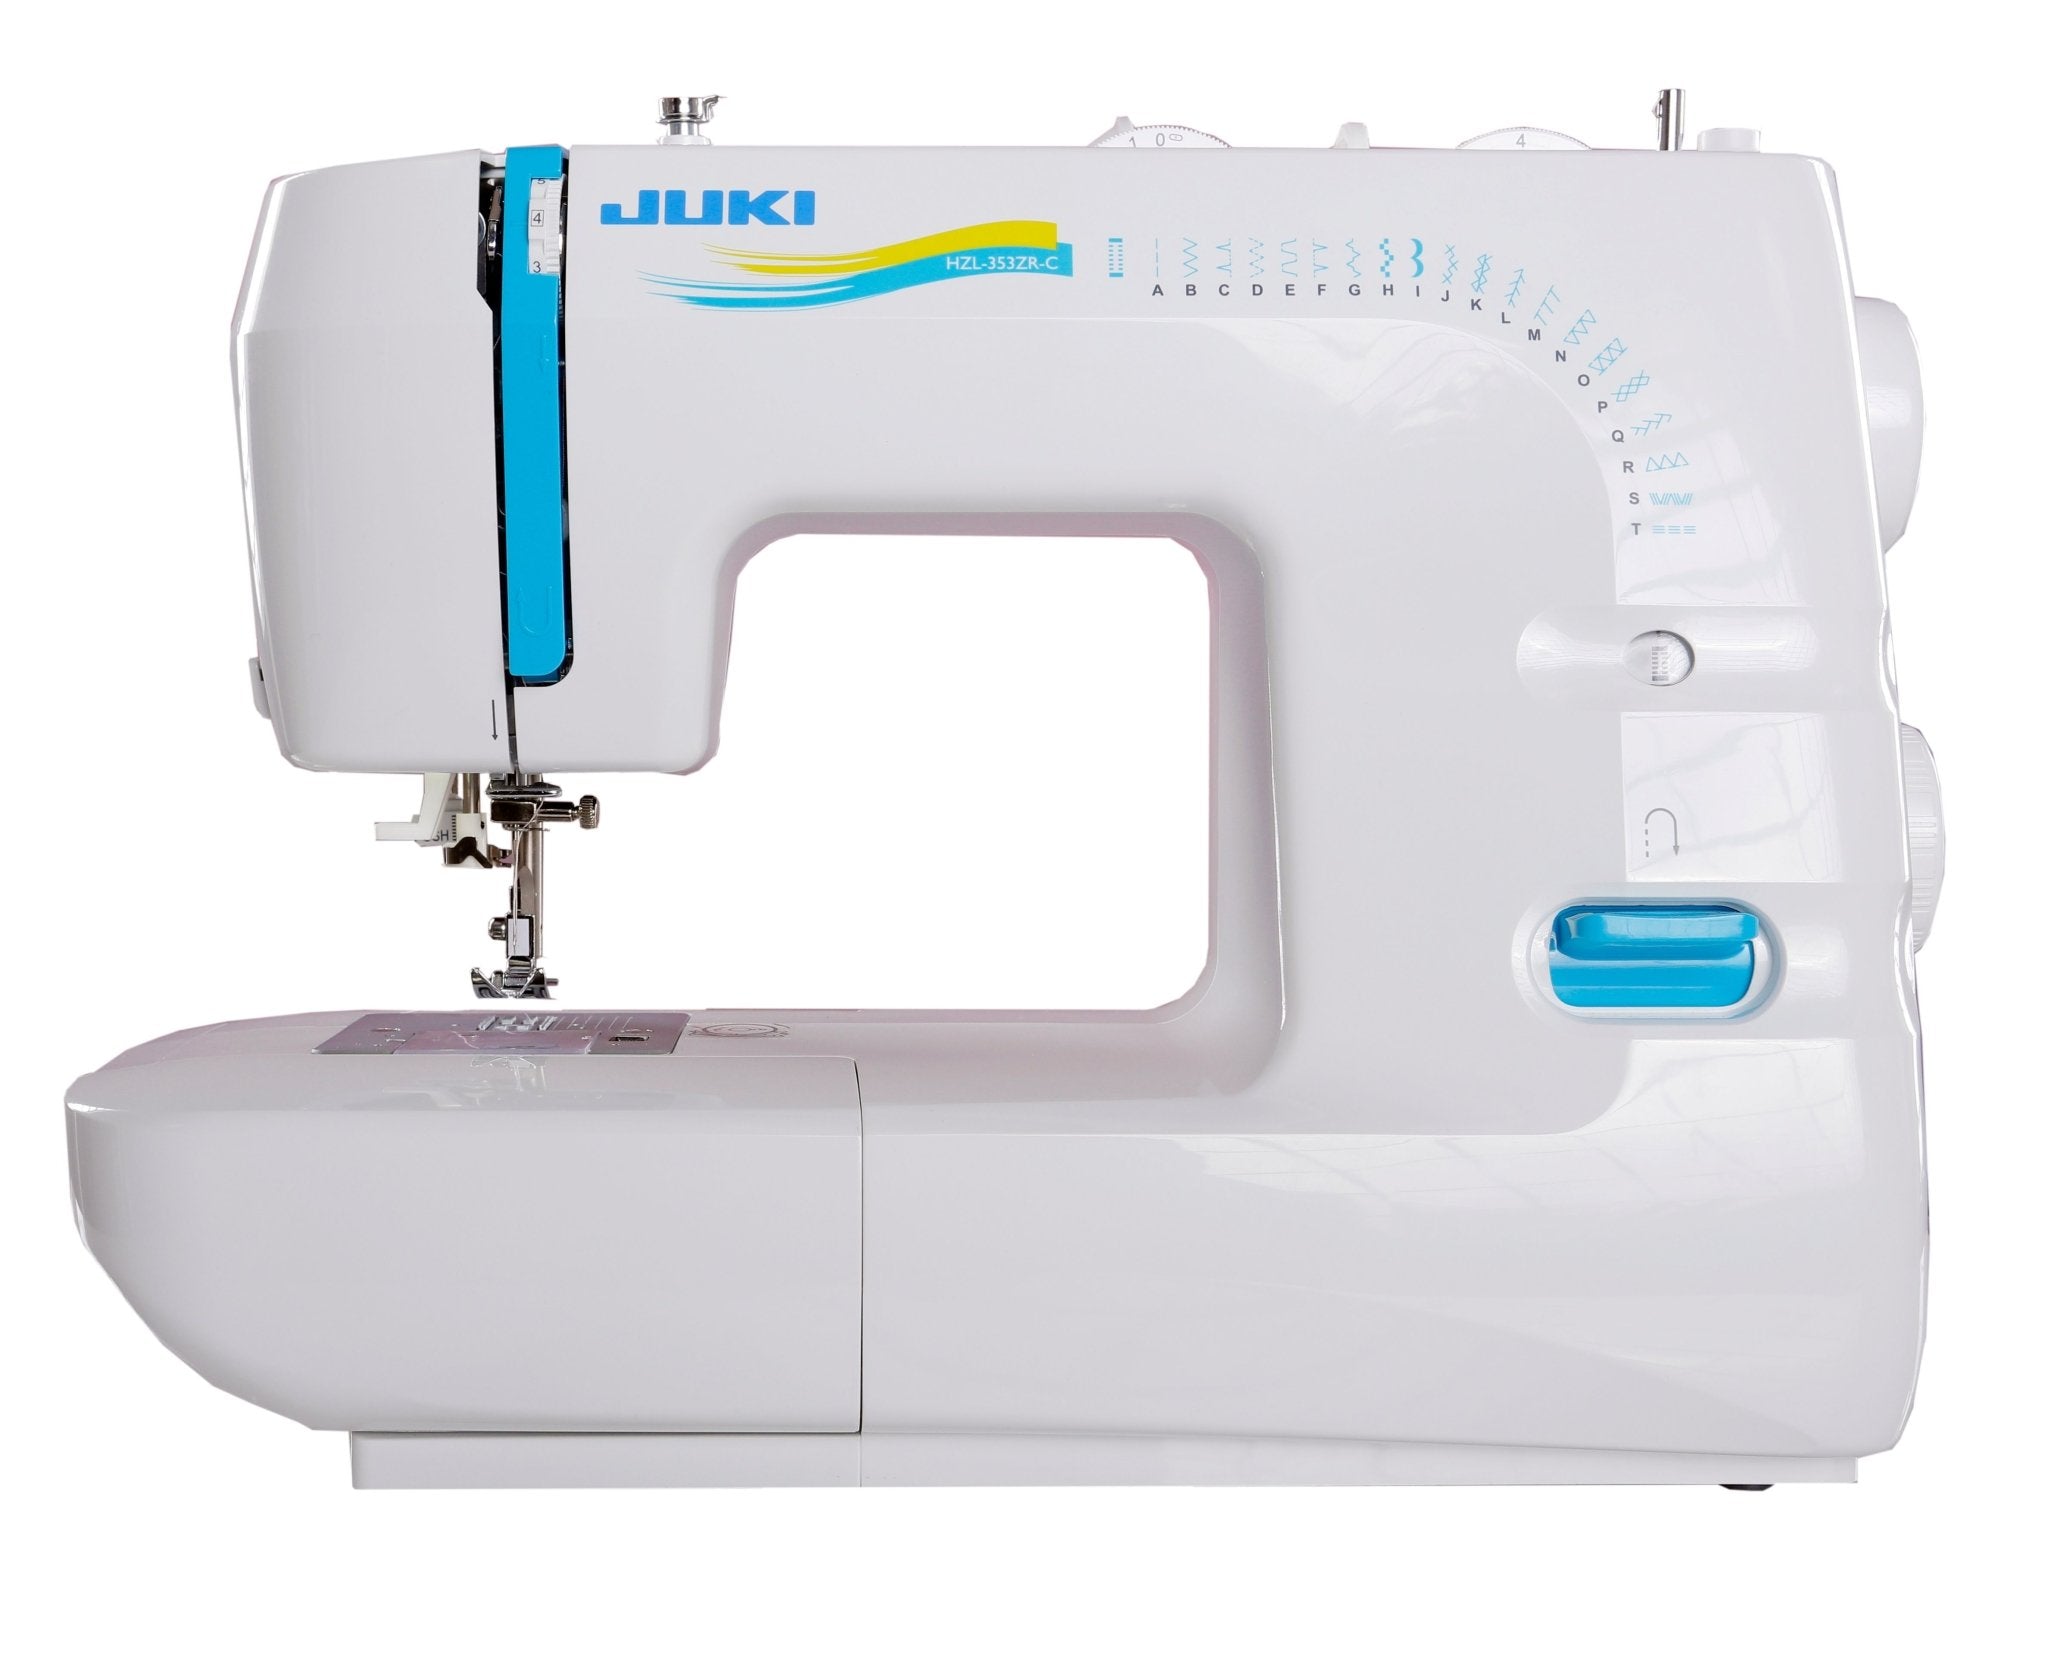 Juki HZL-353ZR-C Sewing Machine, 21 built-in sewing patterns, automatic  needle threader, 750 stitches per minute